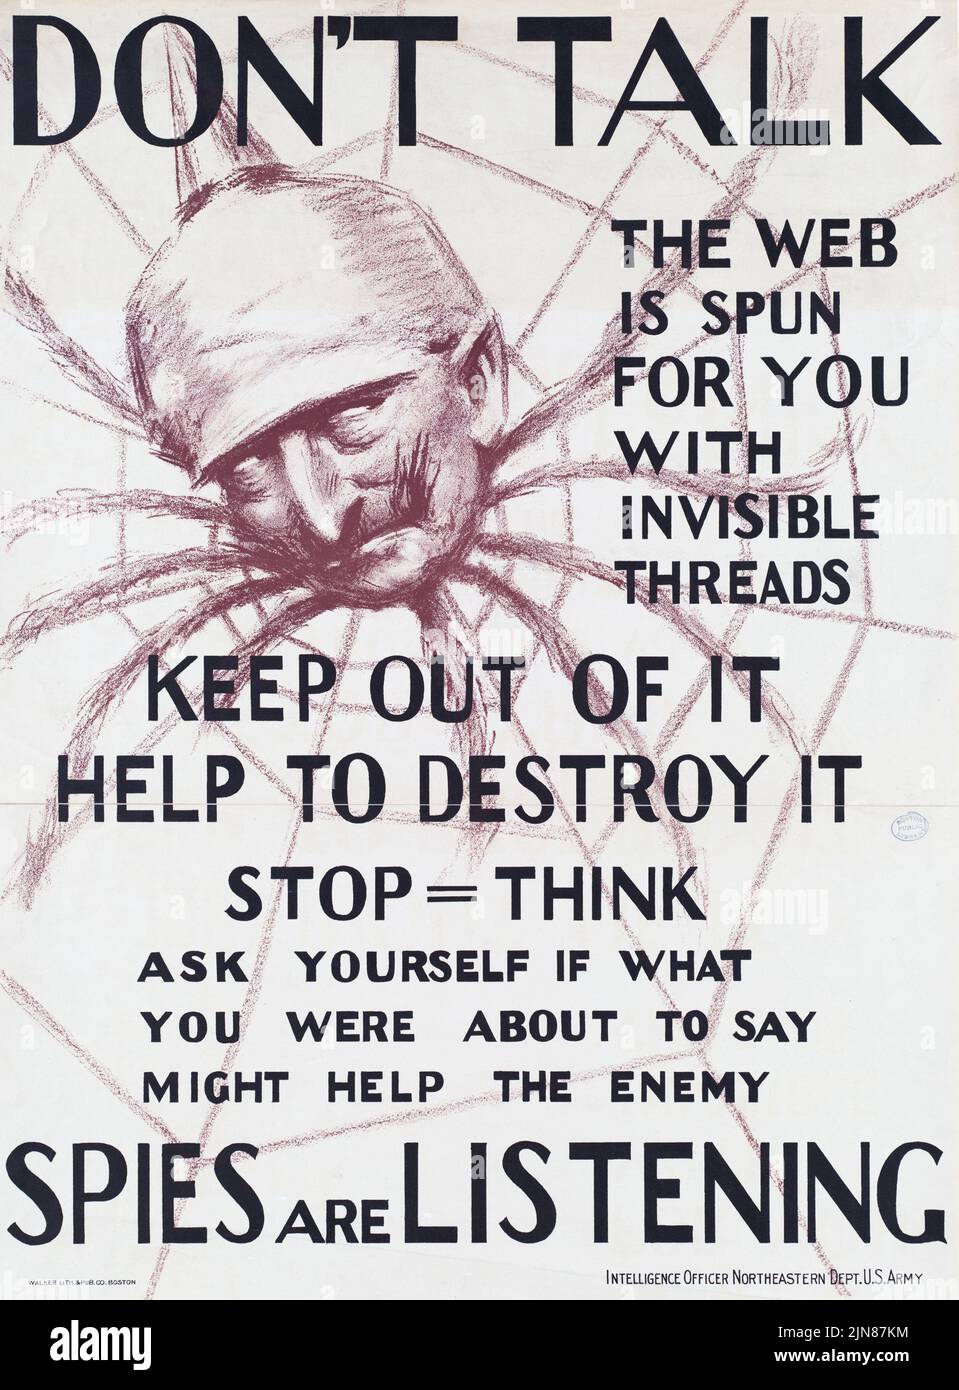 Don’t talk. The web is spun for you with invisible threads, keep out of it, help to destroy it, spies are listening (1917) Head of Wilhelm II as spider. American World War I era poster Stock Photo